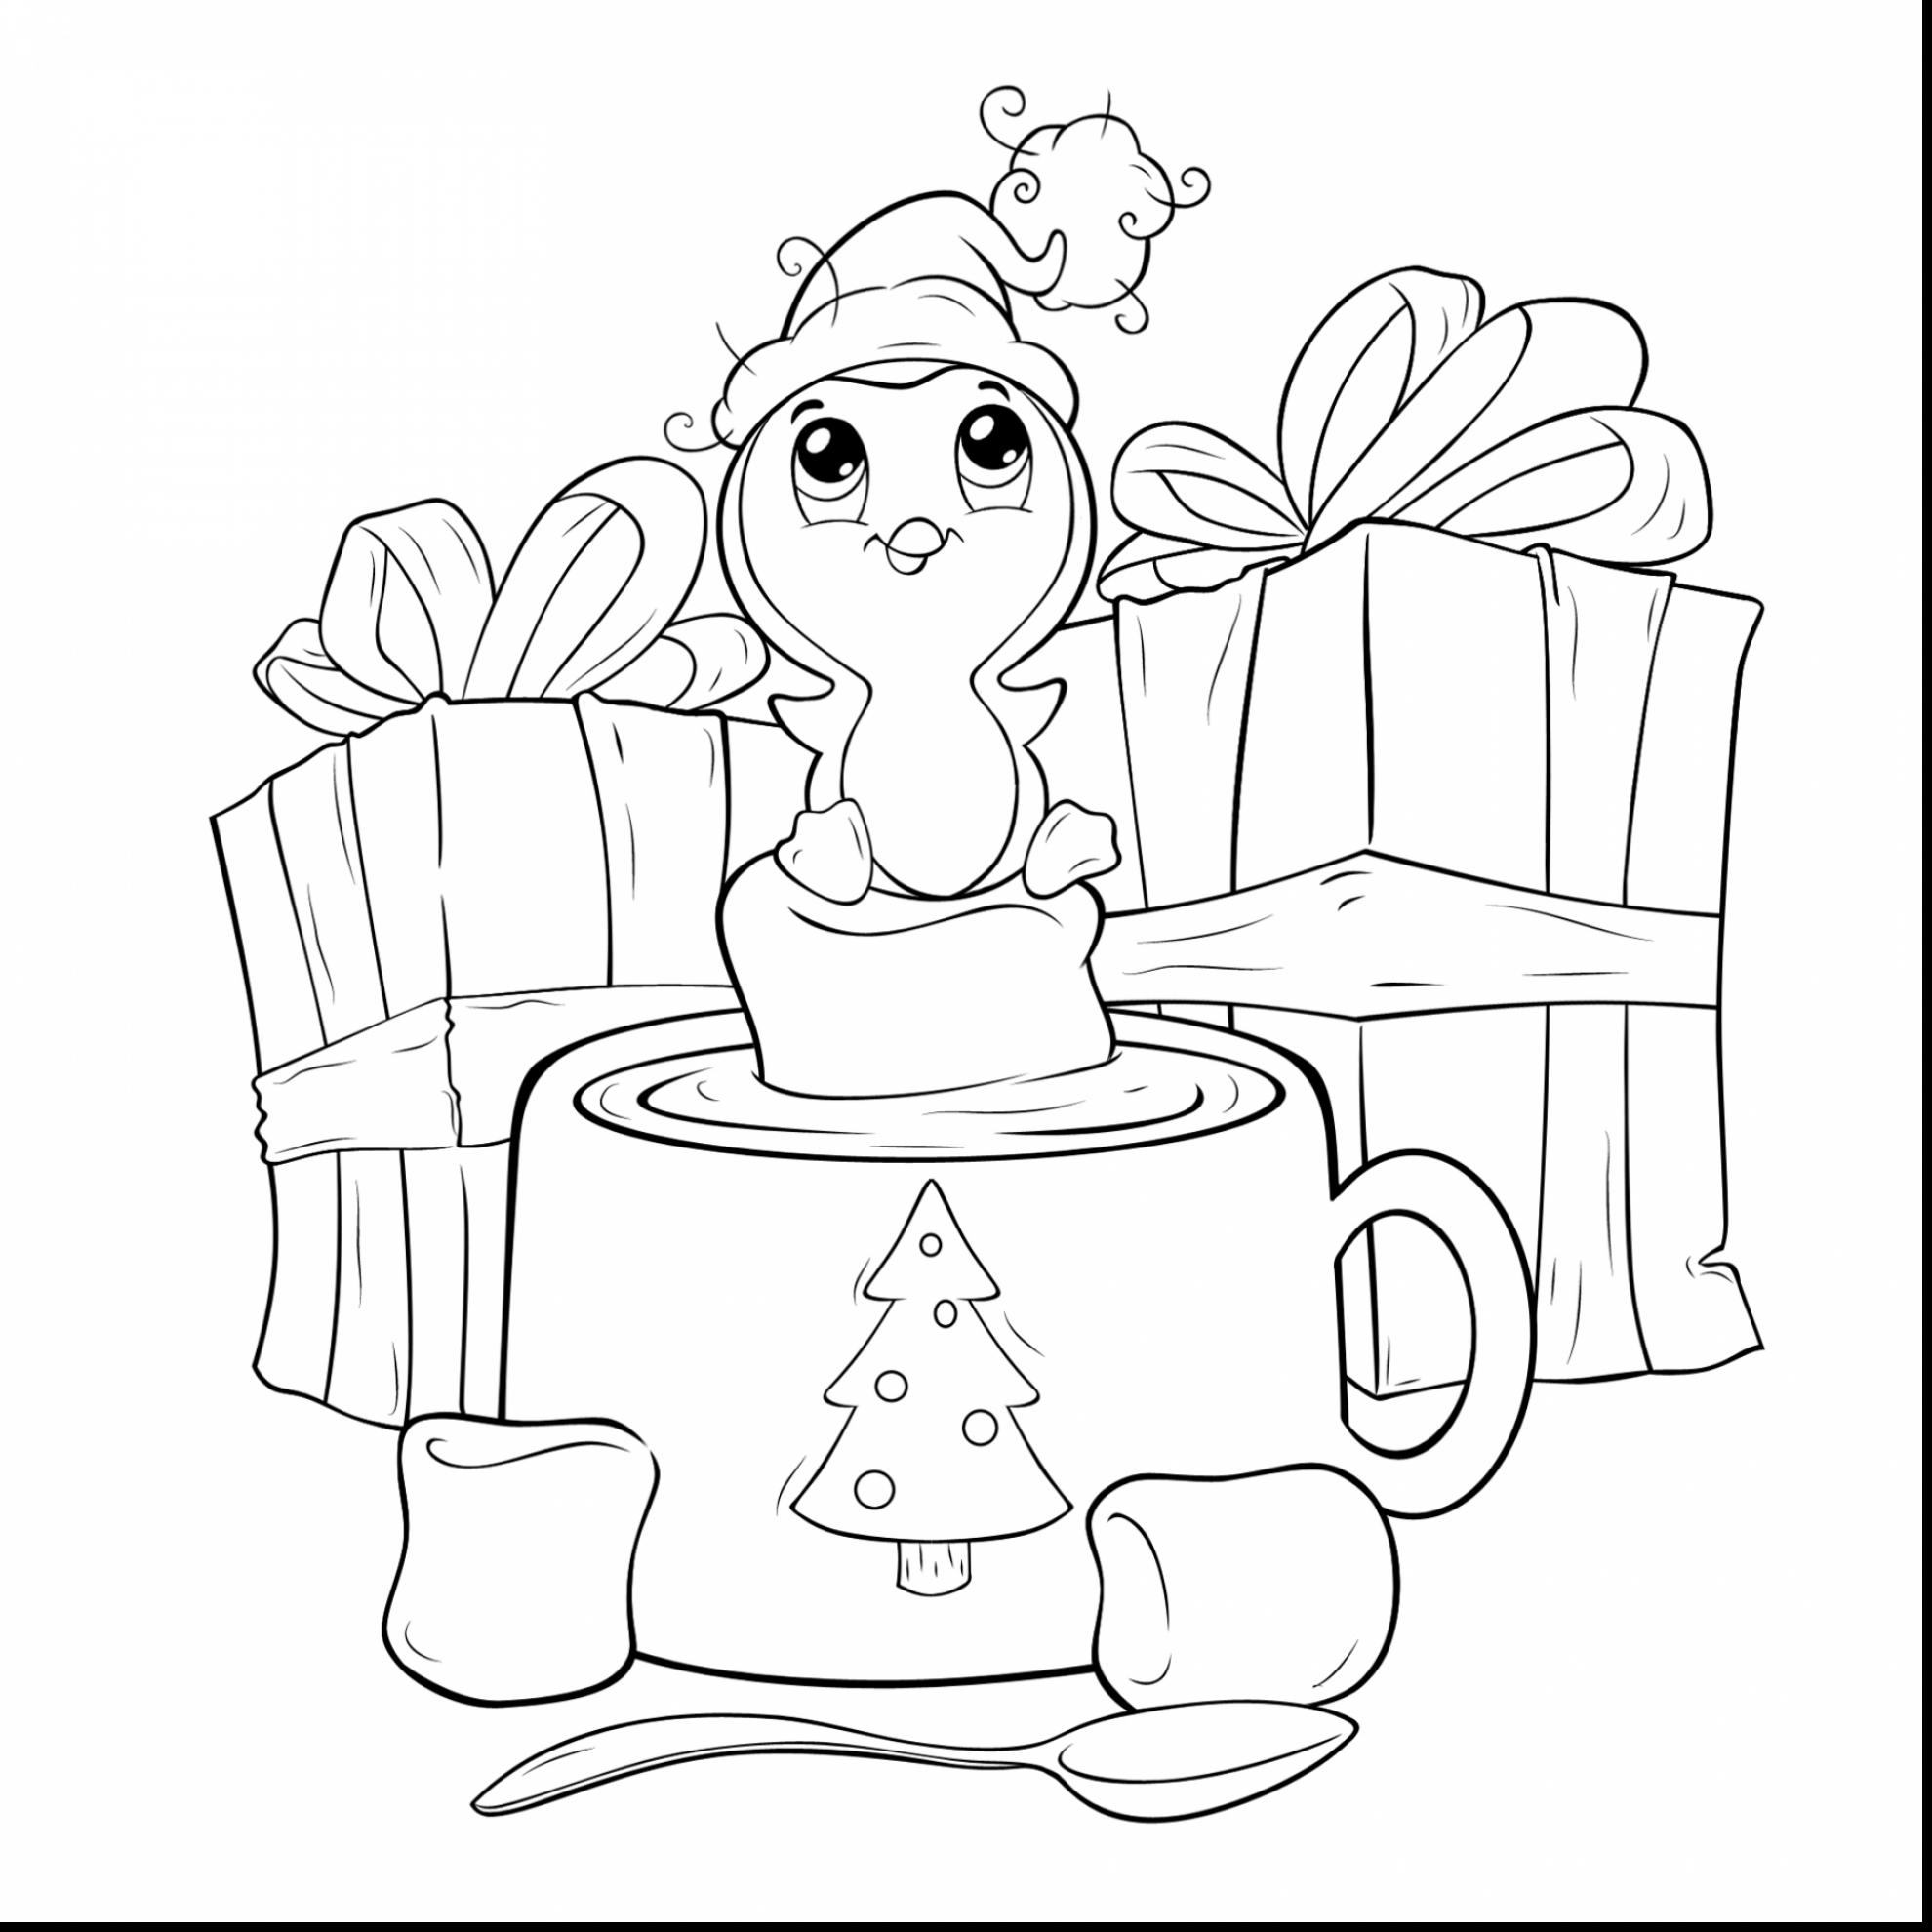 Advent Wreath Coloring Pages Printable at GetColorings.com | Free